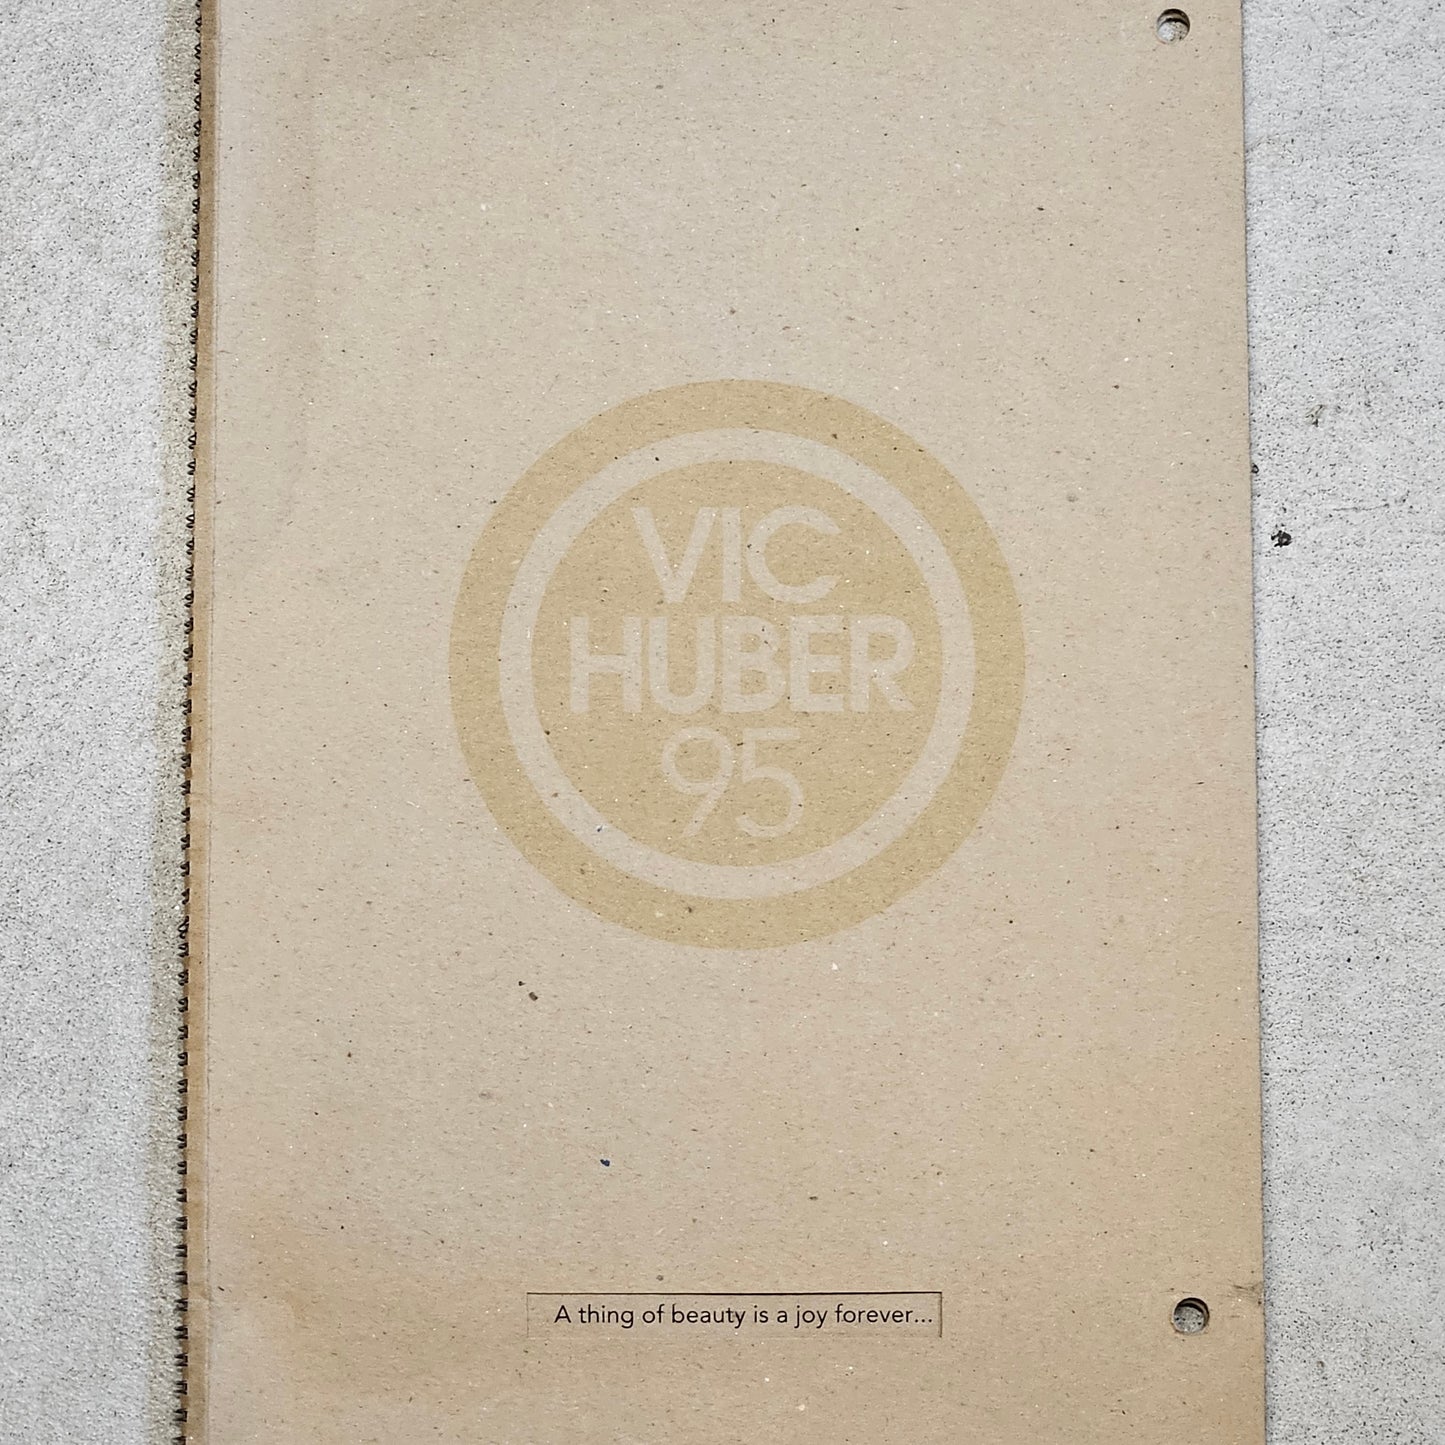 1995 Vic Huber Photography Booklet